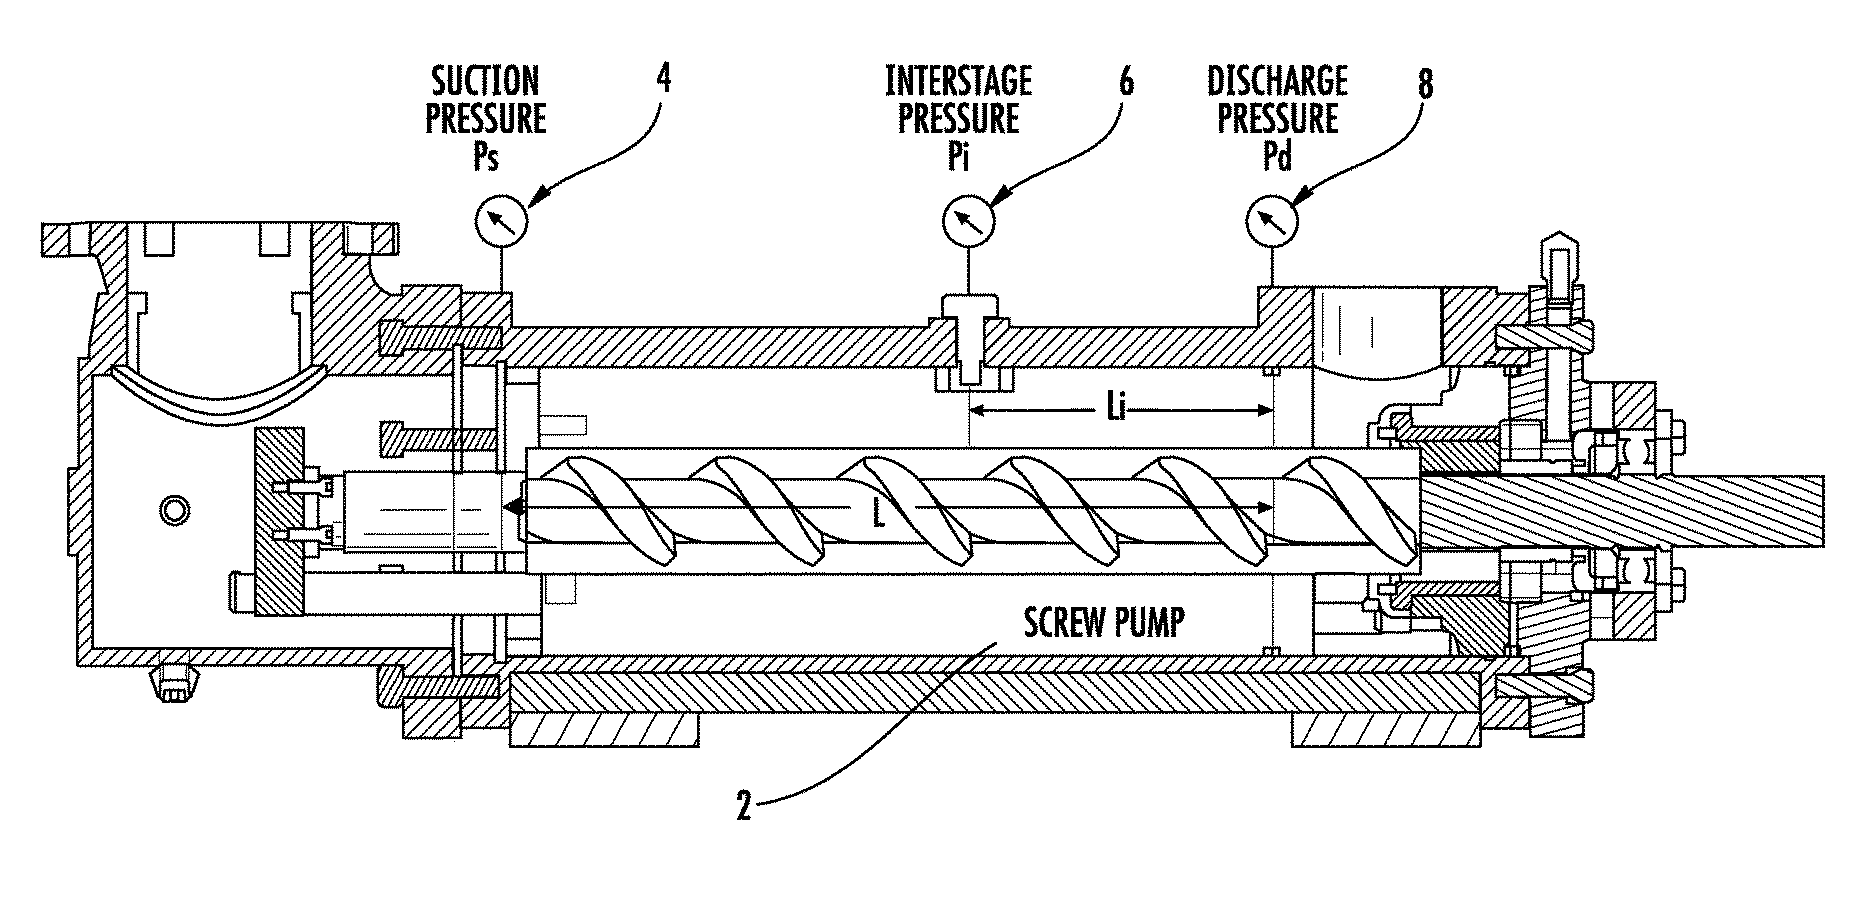 System and method for monitoring and control of cavitation in positive displacement pumps